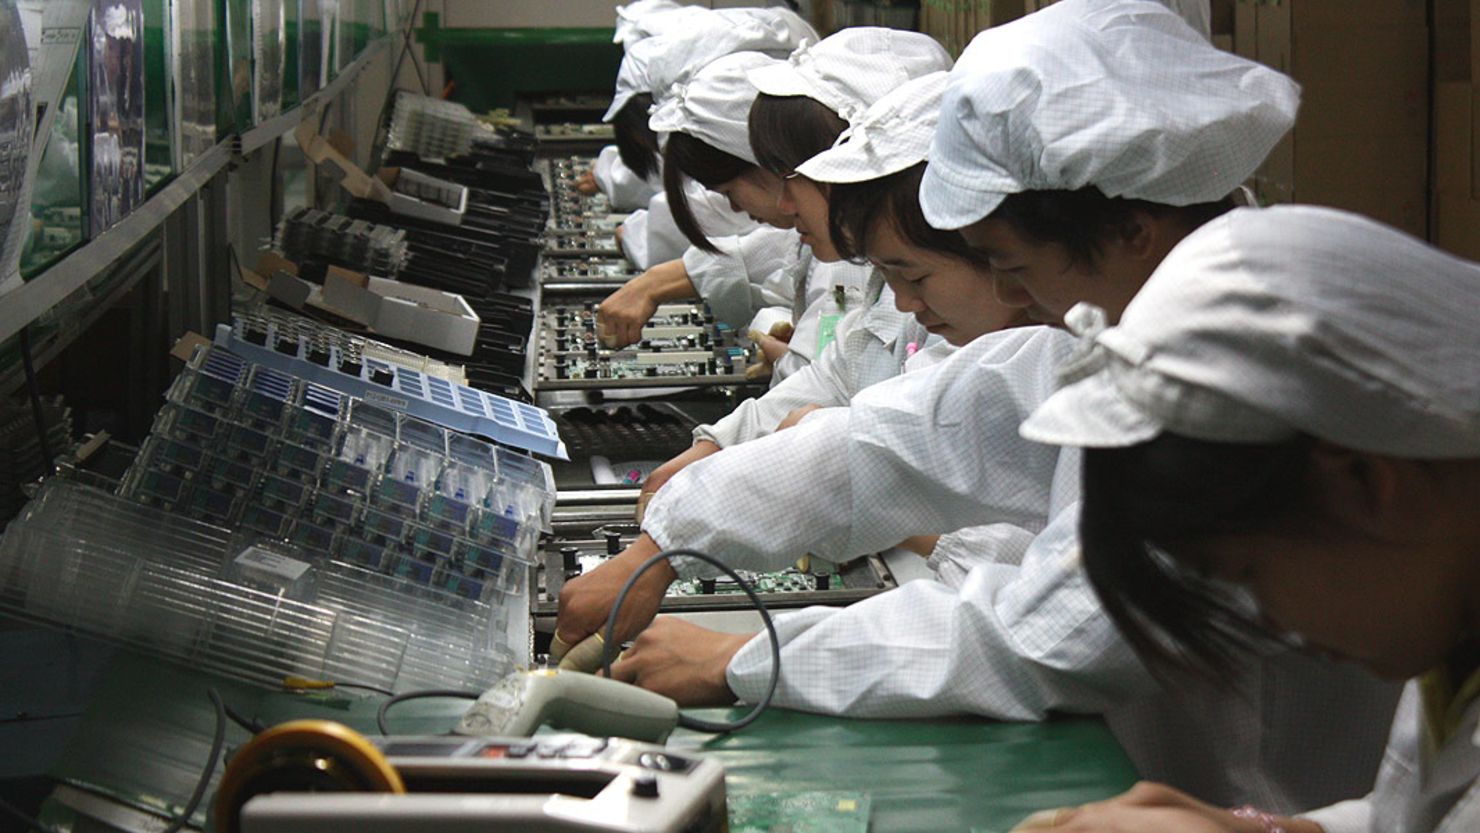 Workers on a production line at Foxconn's Longhua plant, which employs 300,000 people and makes products for Apple.